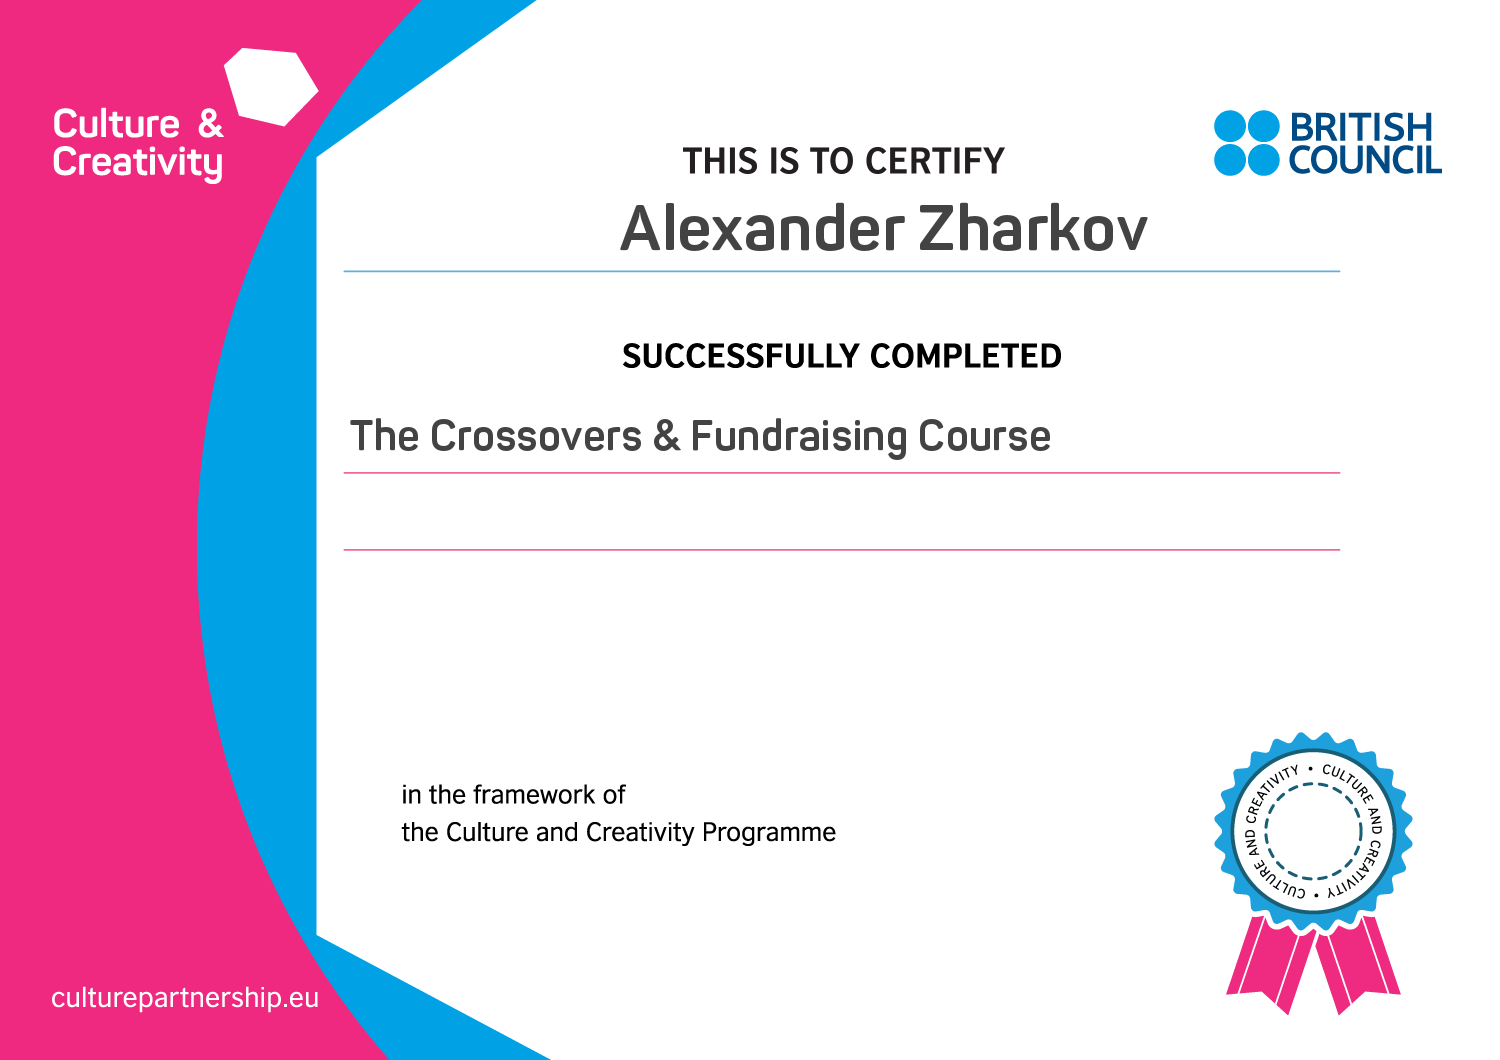 The crossovers & Fundrising courses